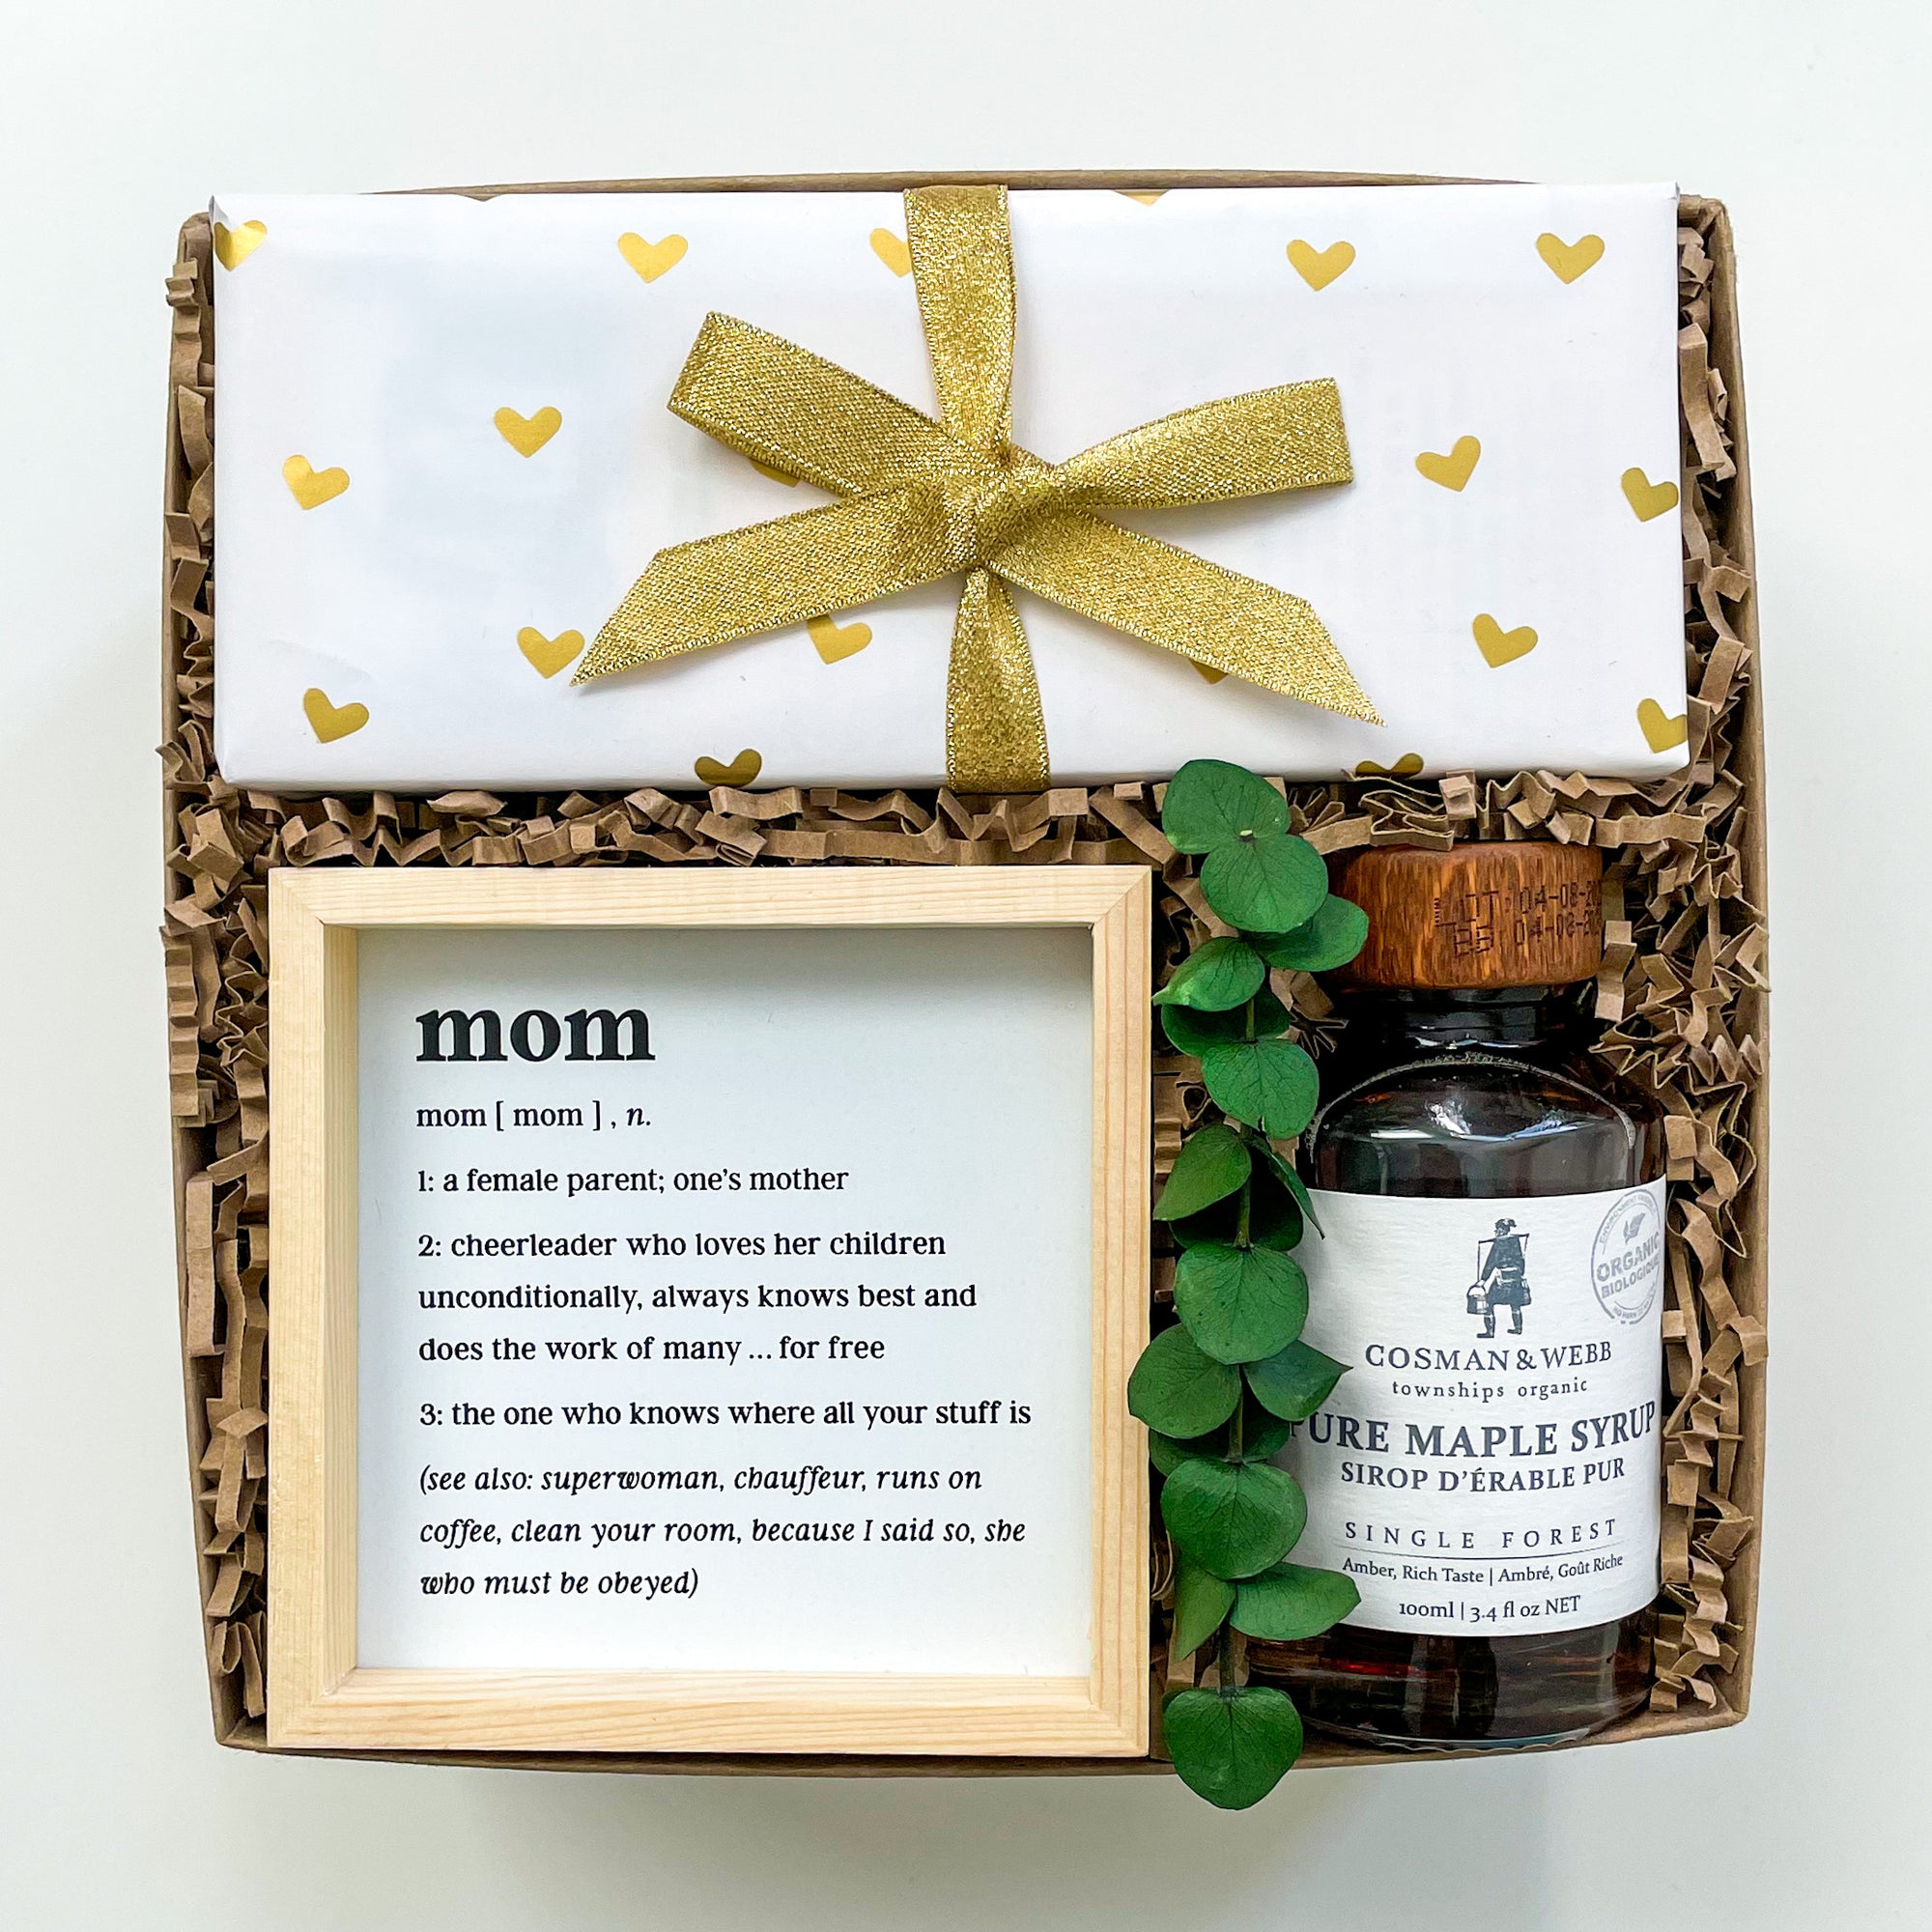 Give Comfort In A Box With Our Luxury Sympathy & Healing Gifts - Black Bow  Gift Co.